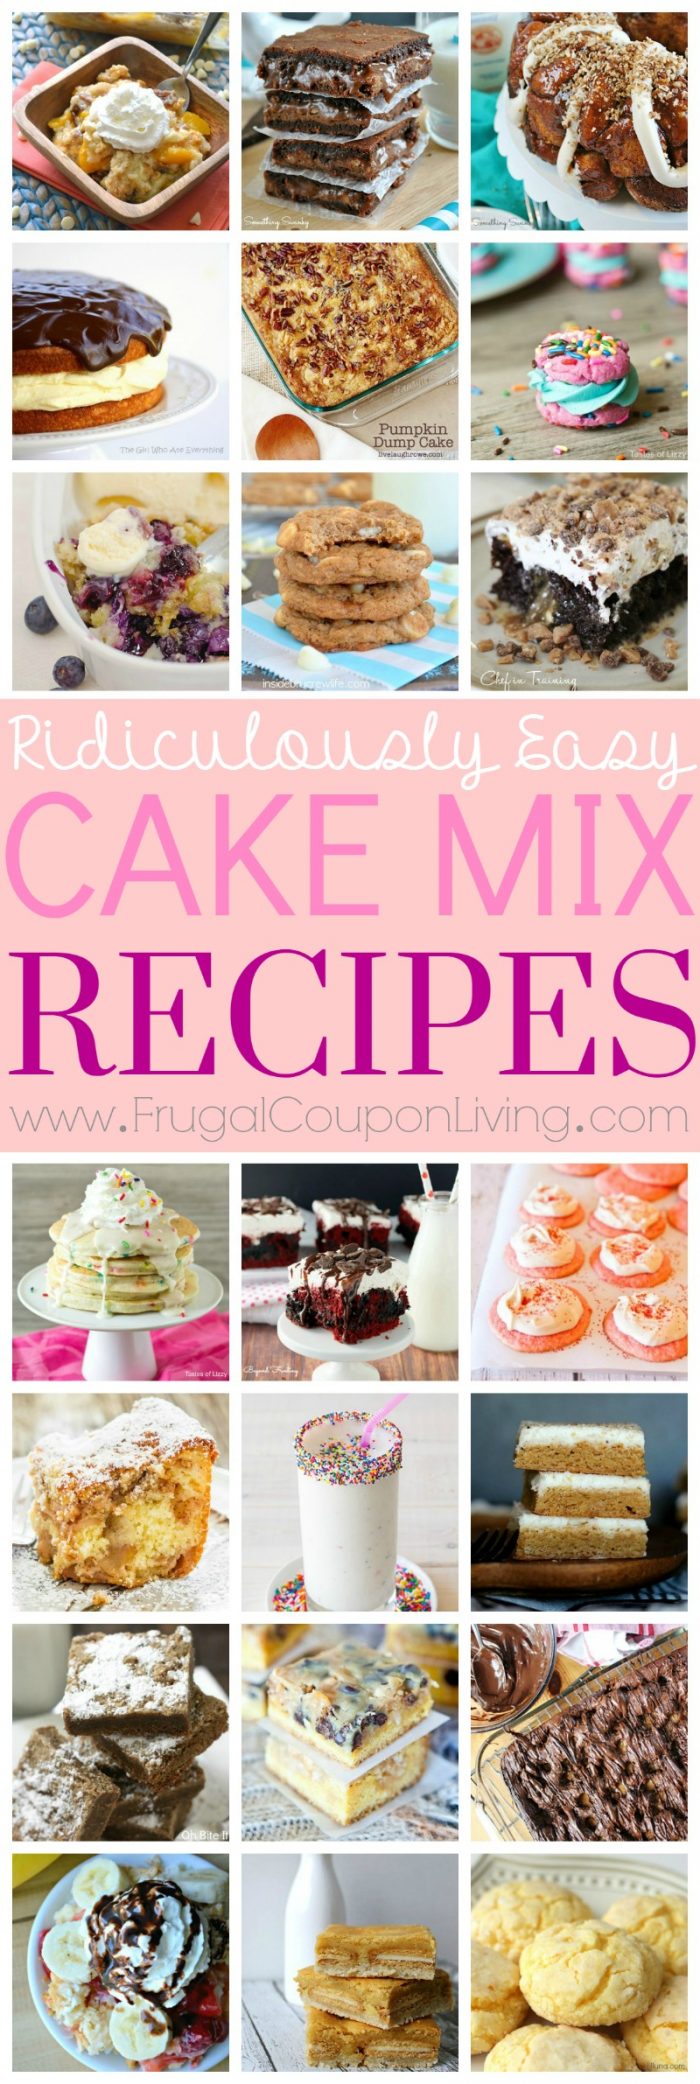 cake-mix-recipes-Collage-frugal-coupon-living